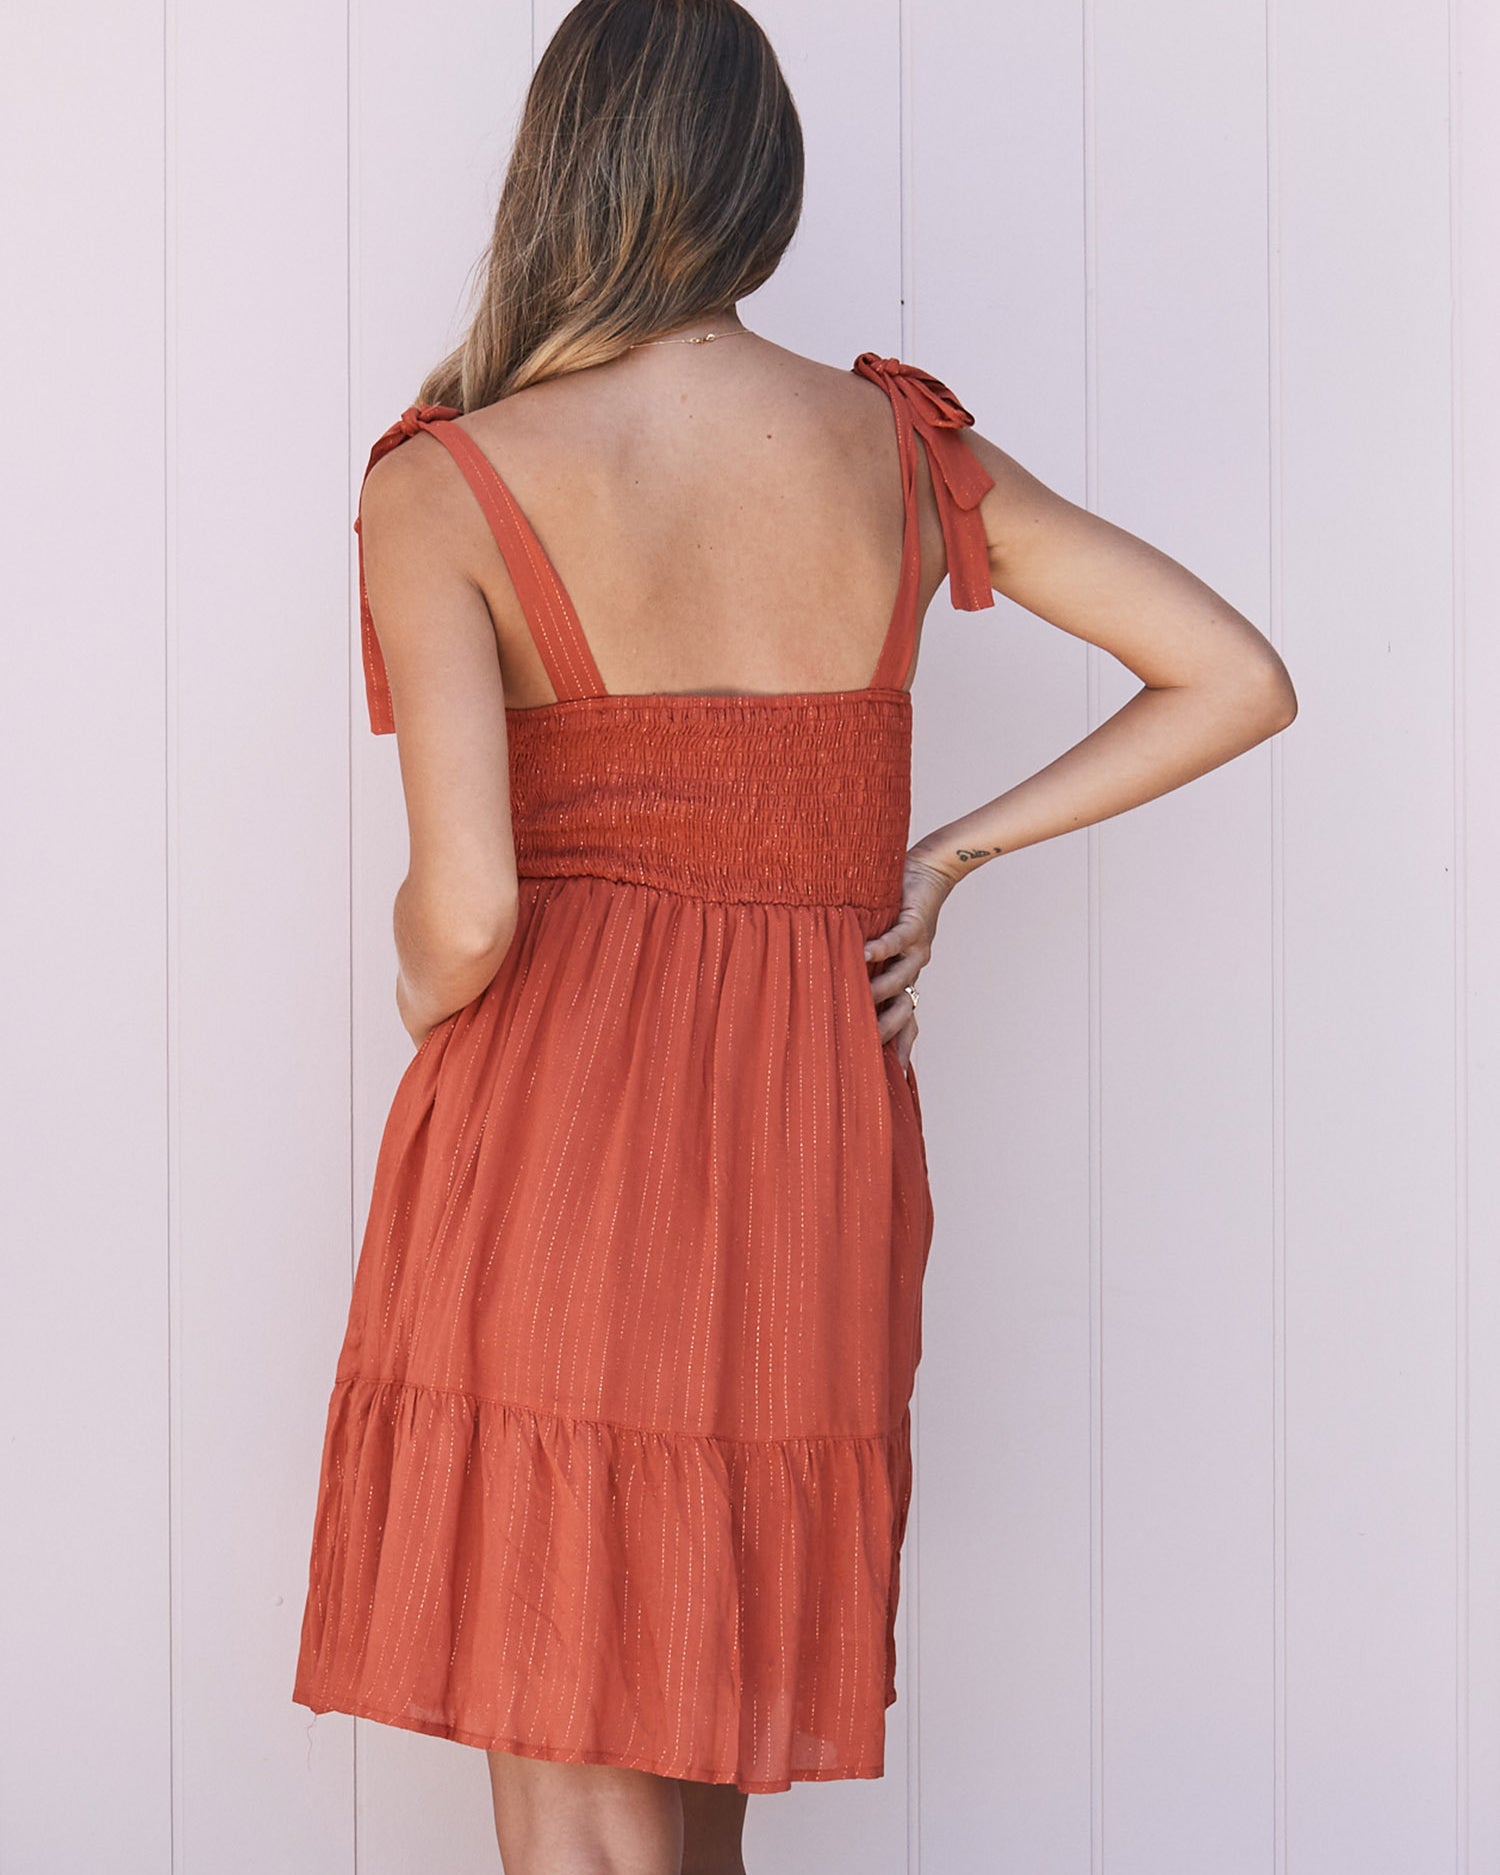 Back View - A pregnant Woman in Gold Thread Nursing Friendly Maternity Dress in Rust 